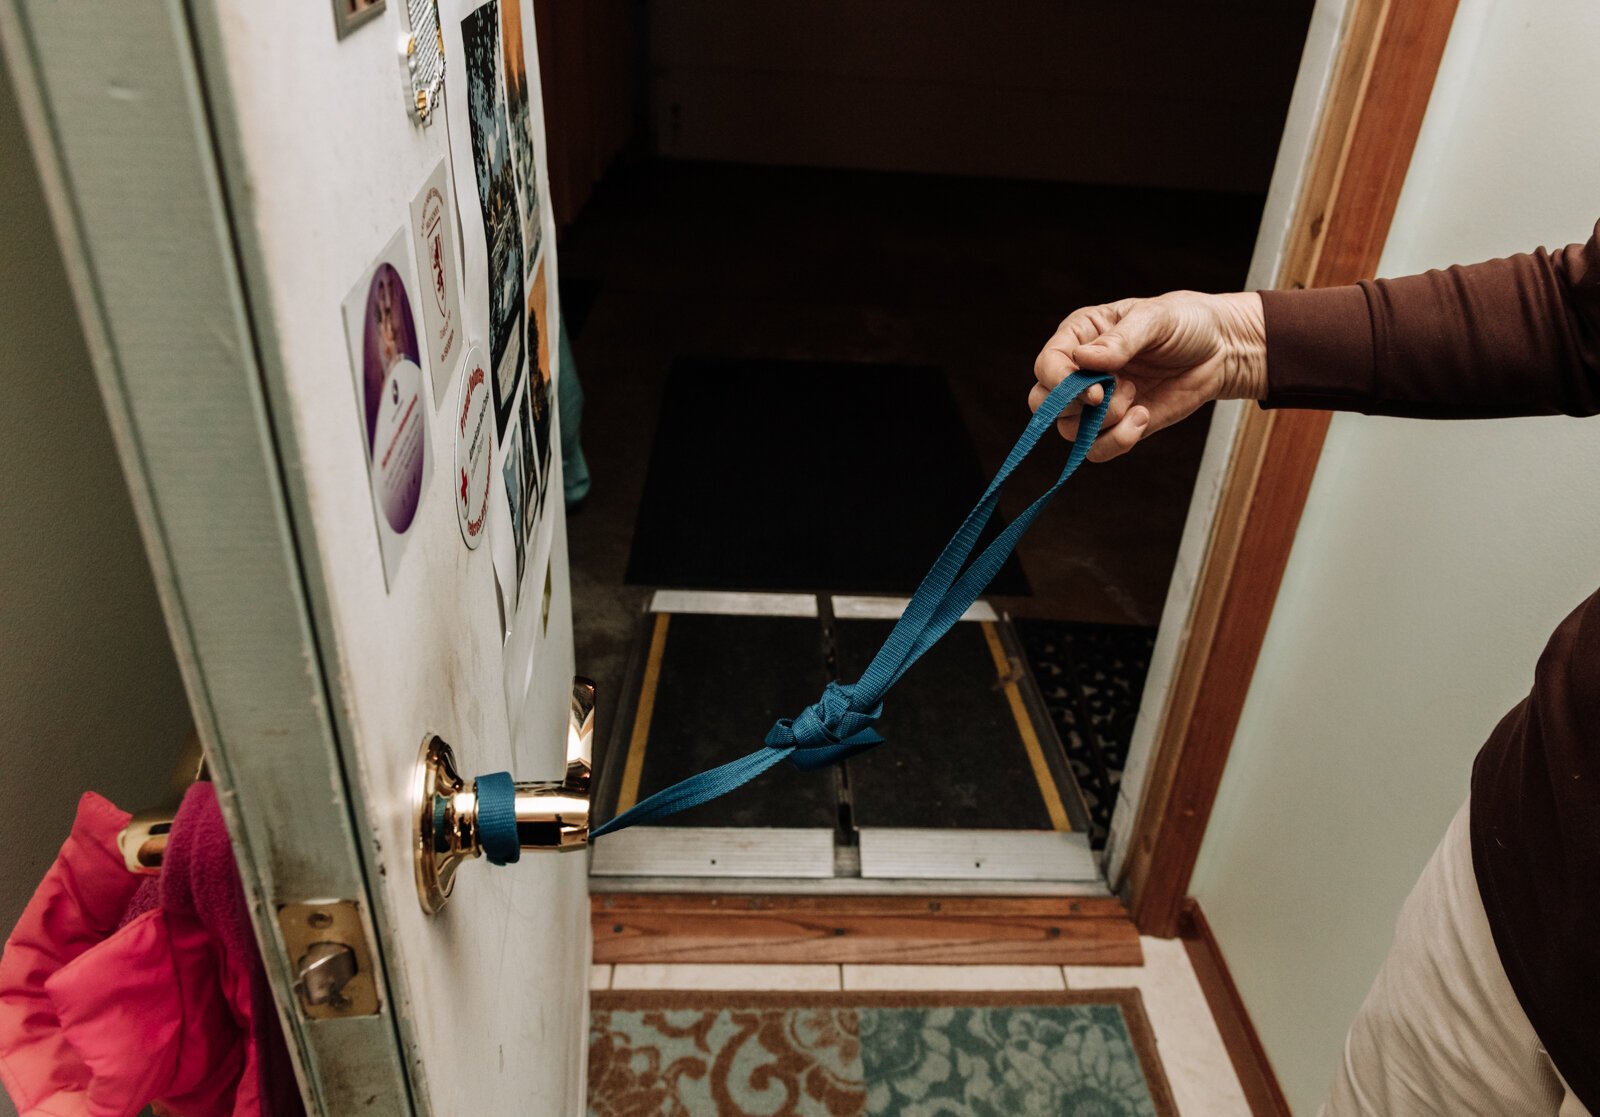 In order to get into his home from the garage Ron Duchovic has to pull a string to open the door in his home.